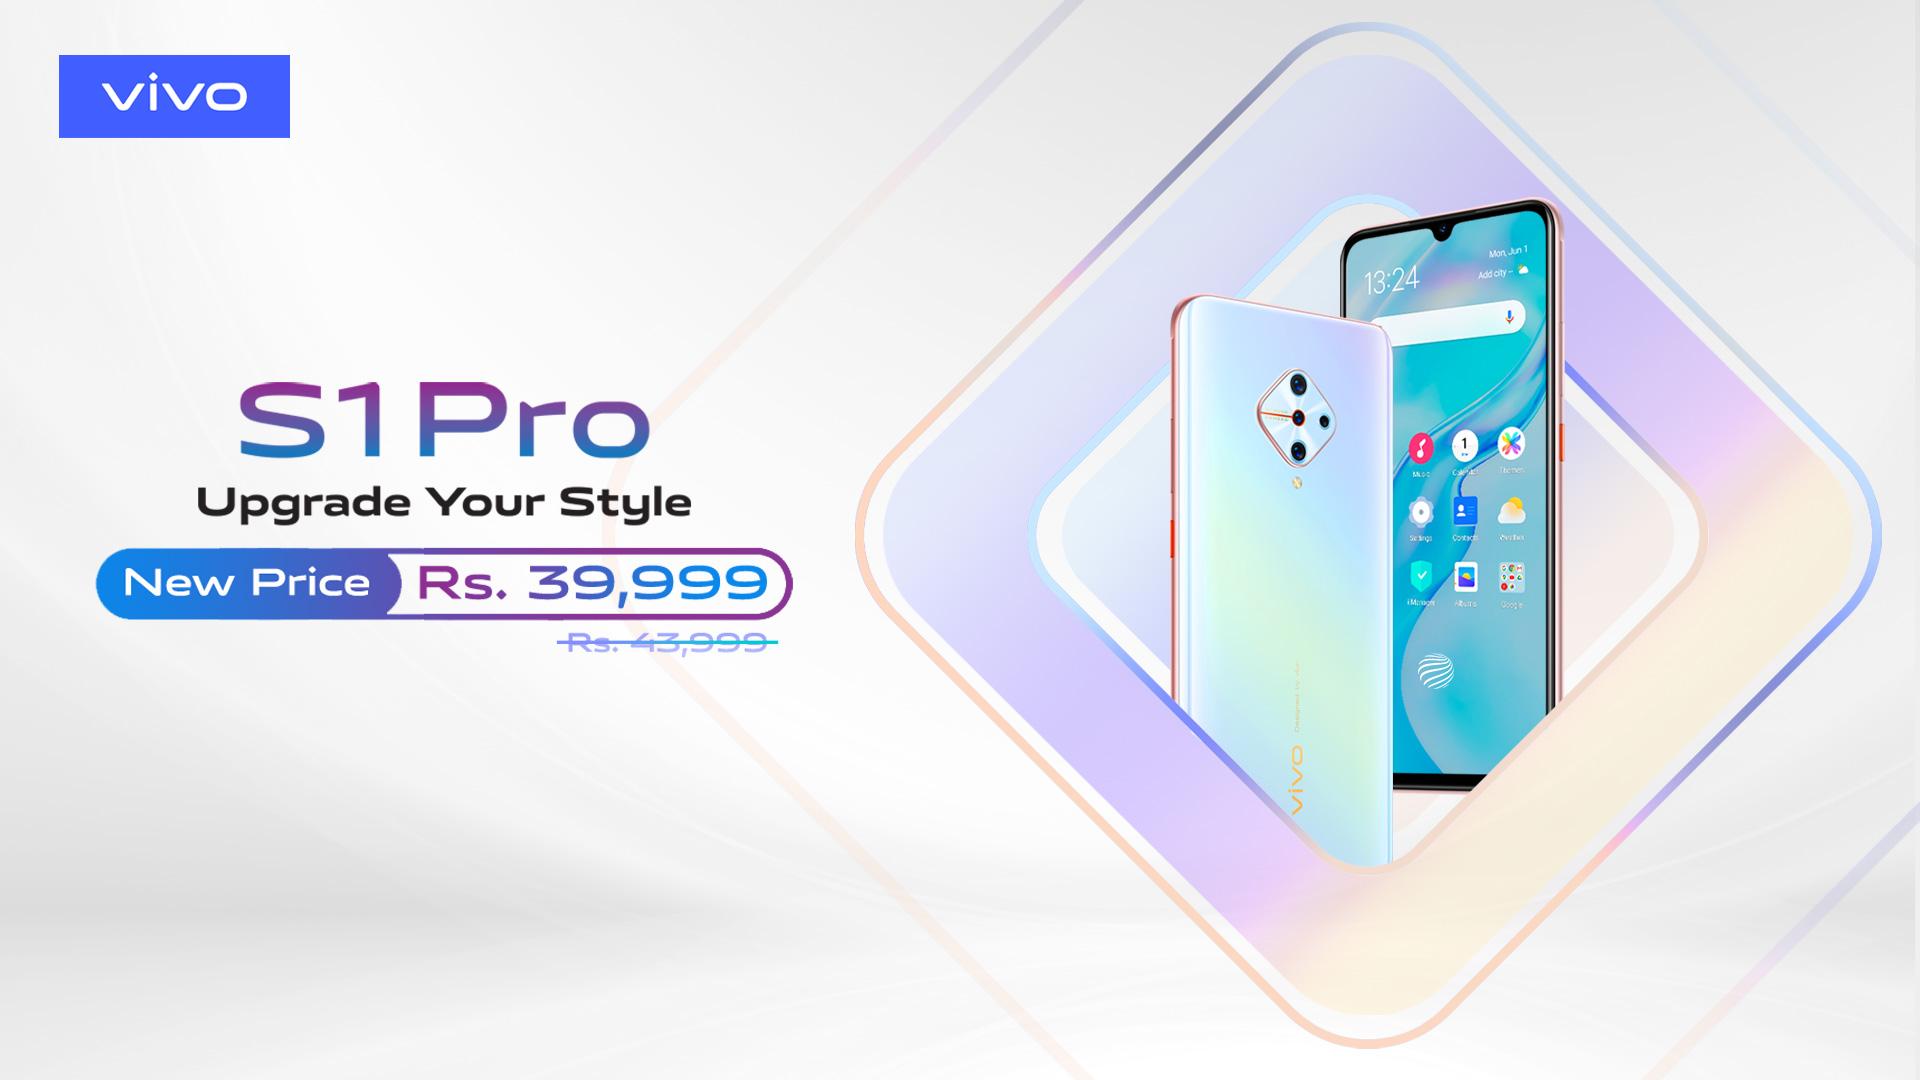 vivo S1 Pro is Now Available at a More Attractive Price in Pakistan